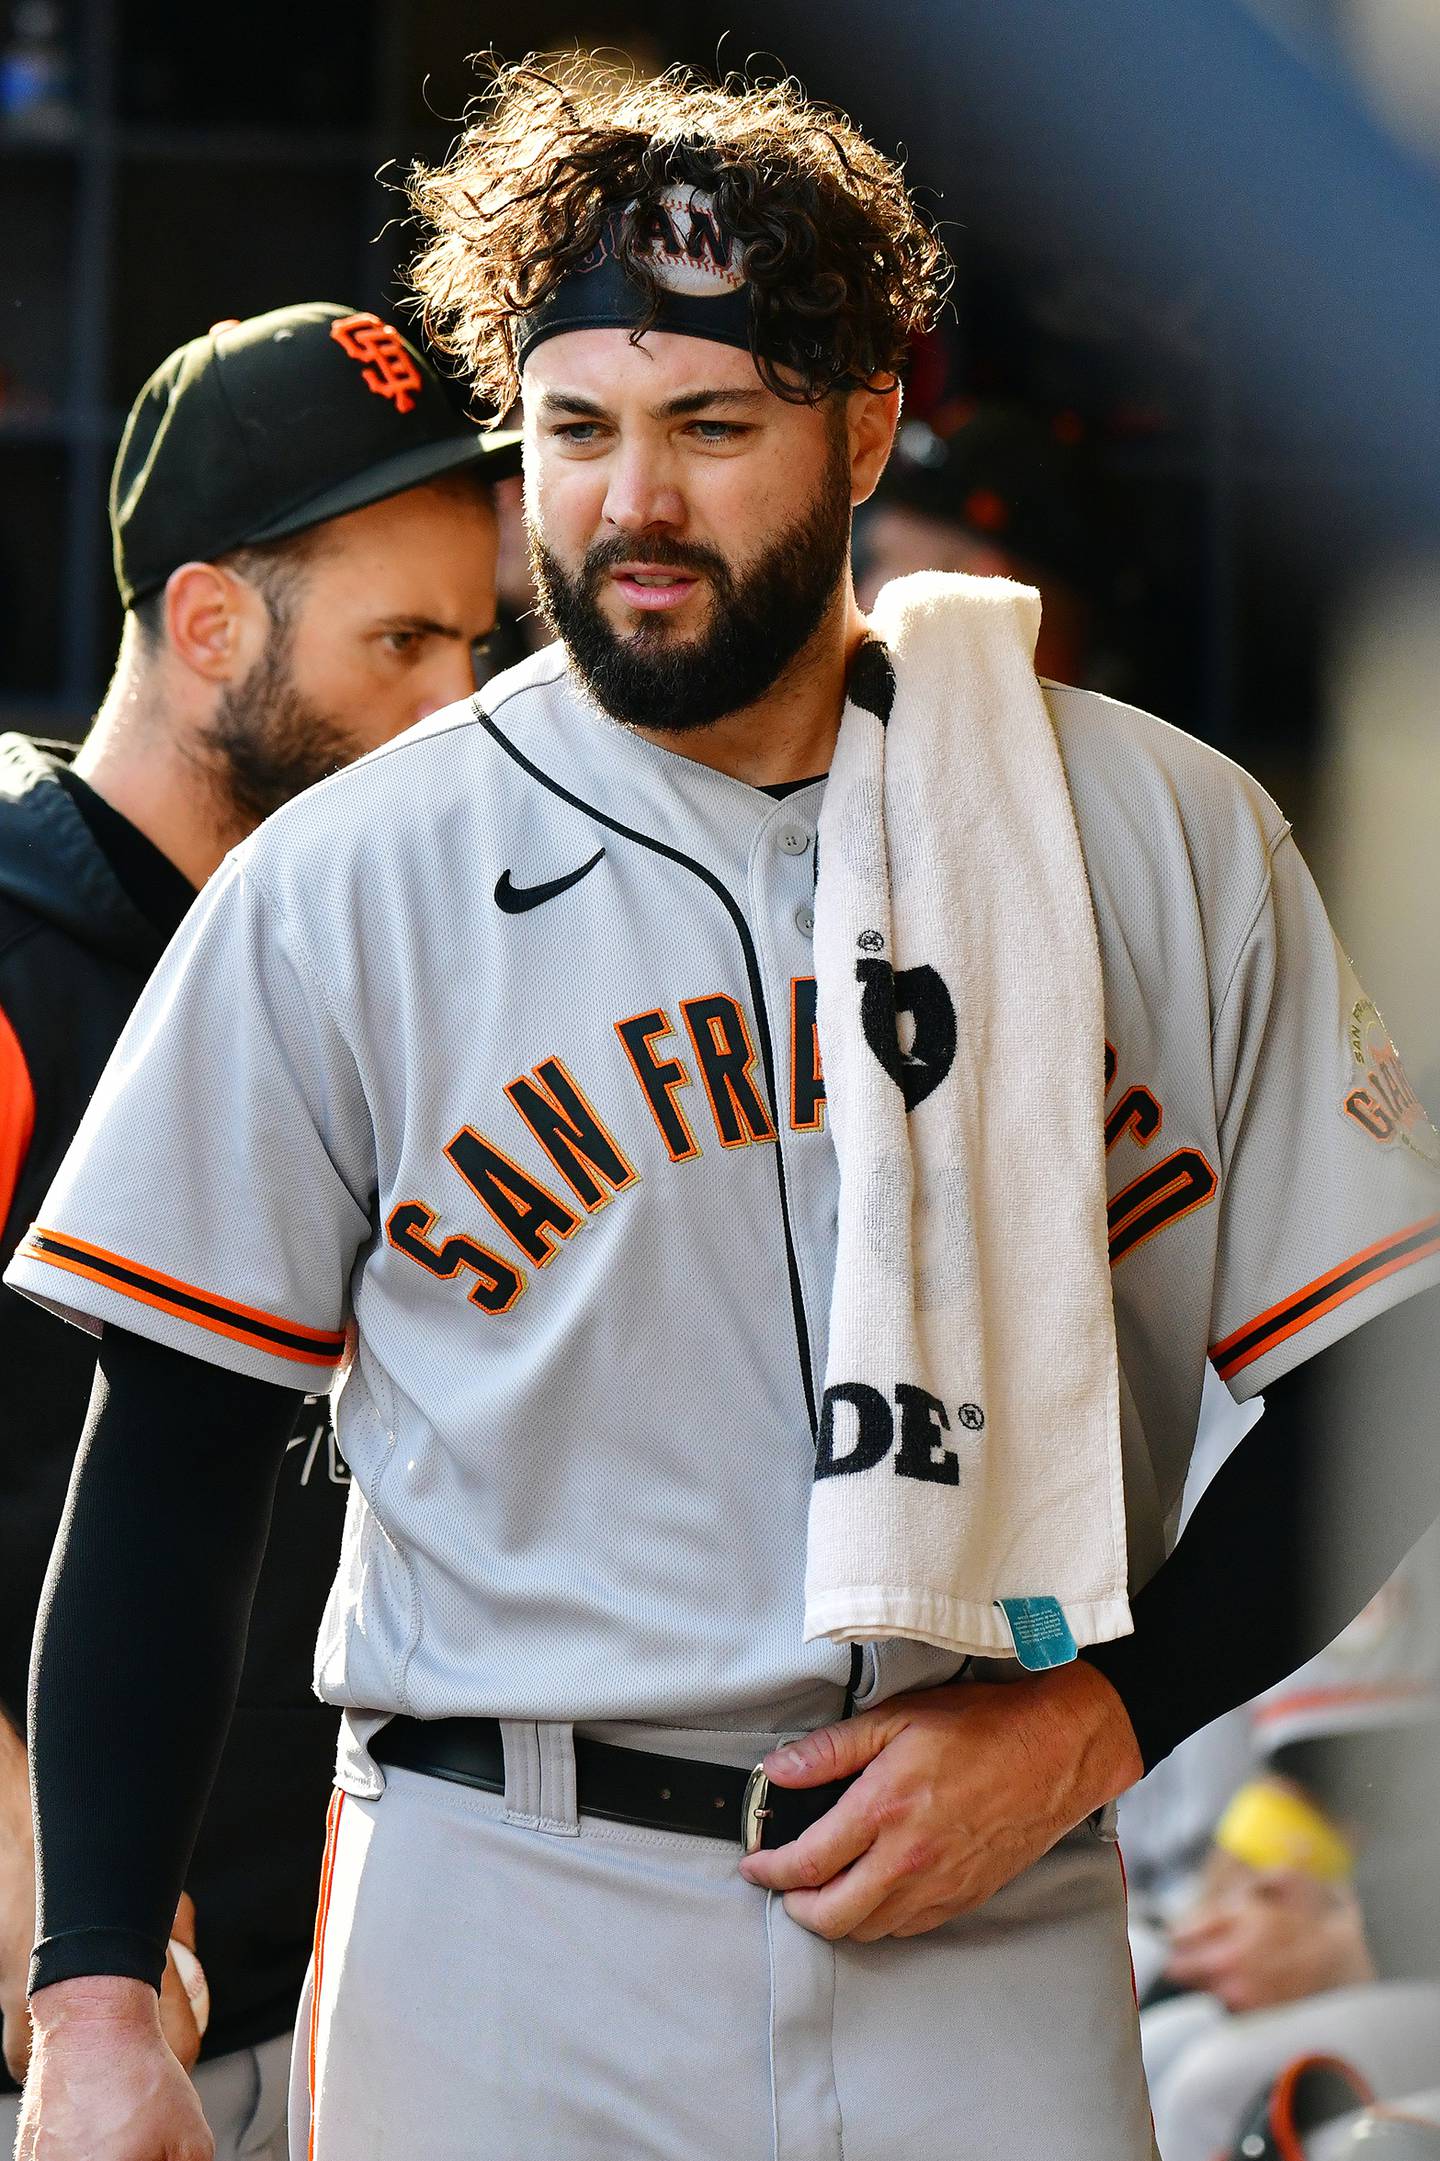 Giants starter Jakob Junis stands in the dugout during a game against the Brewers on Thursday, Sept. 8, 2022. The Rock Falls native has had a solid season in his first year with San Francisco.